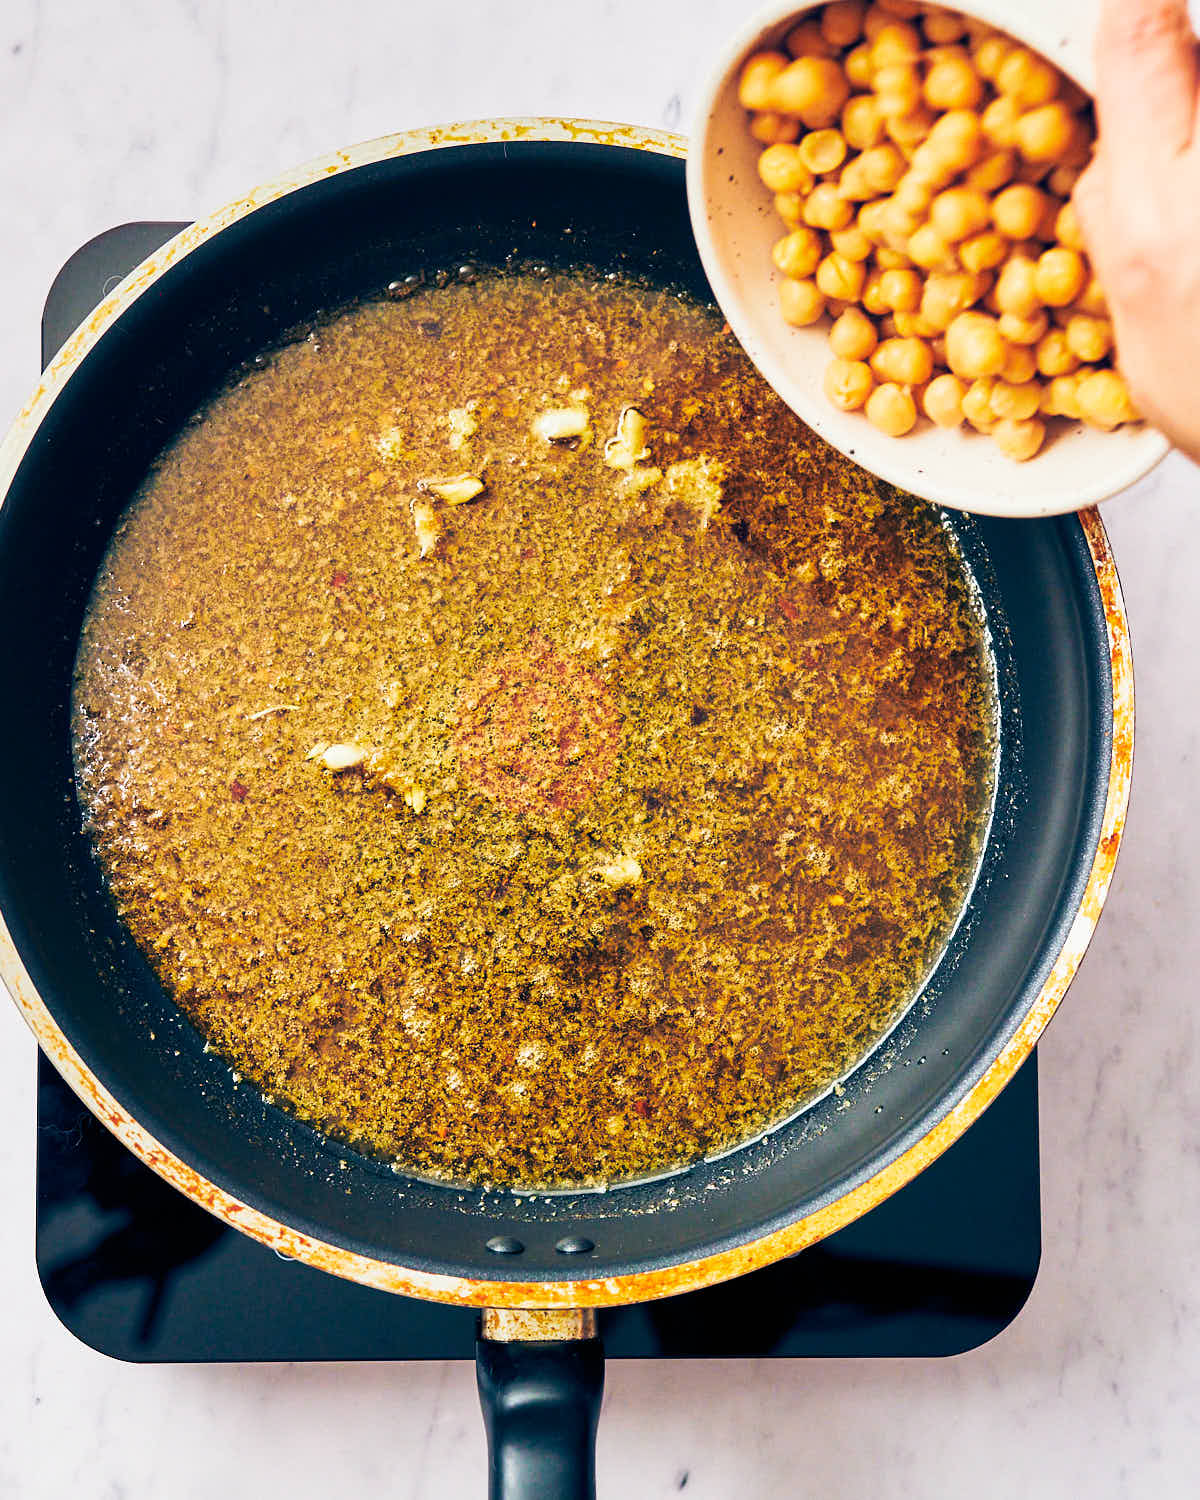 A skillet with oil, spices, and garlic with chickpeas being added.